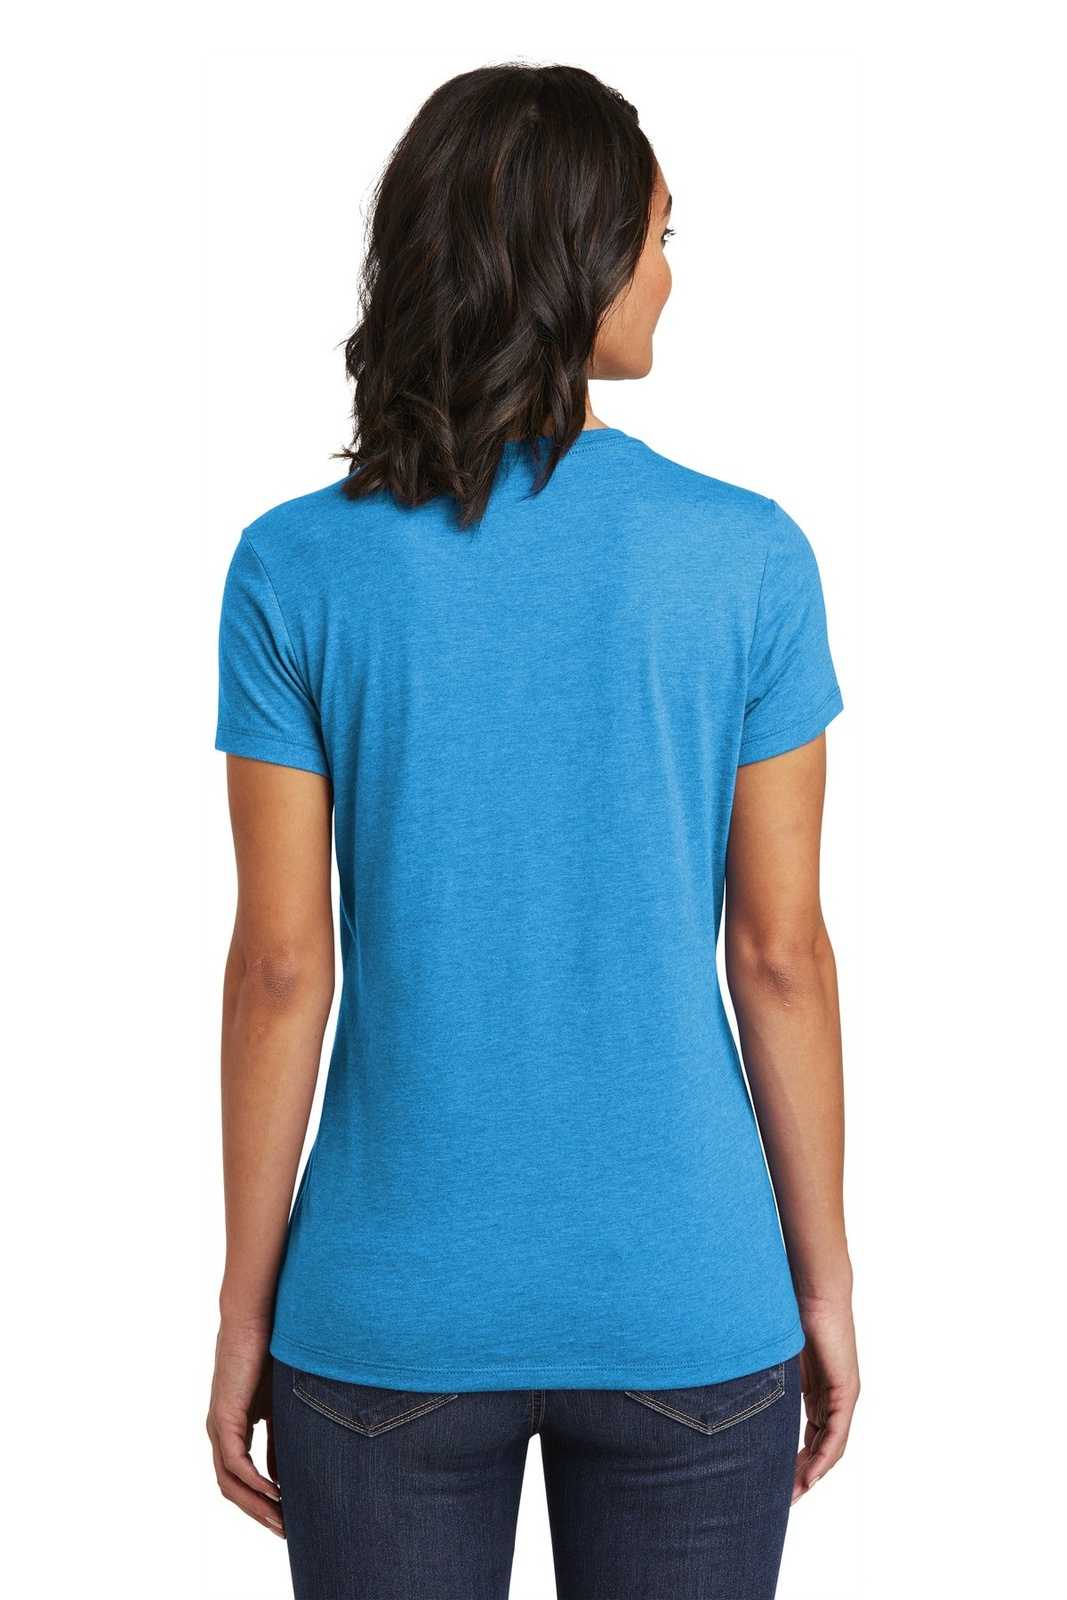 District DT6002 Women's Very Important Tee - Heathered Bright Turquoise - HIT a Double - 1